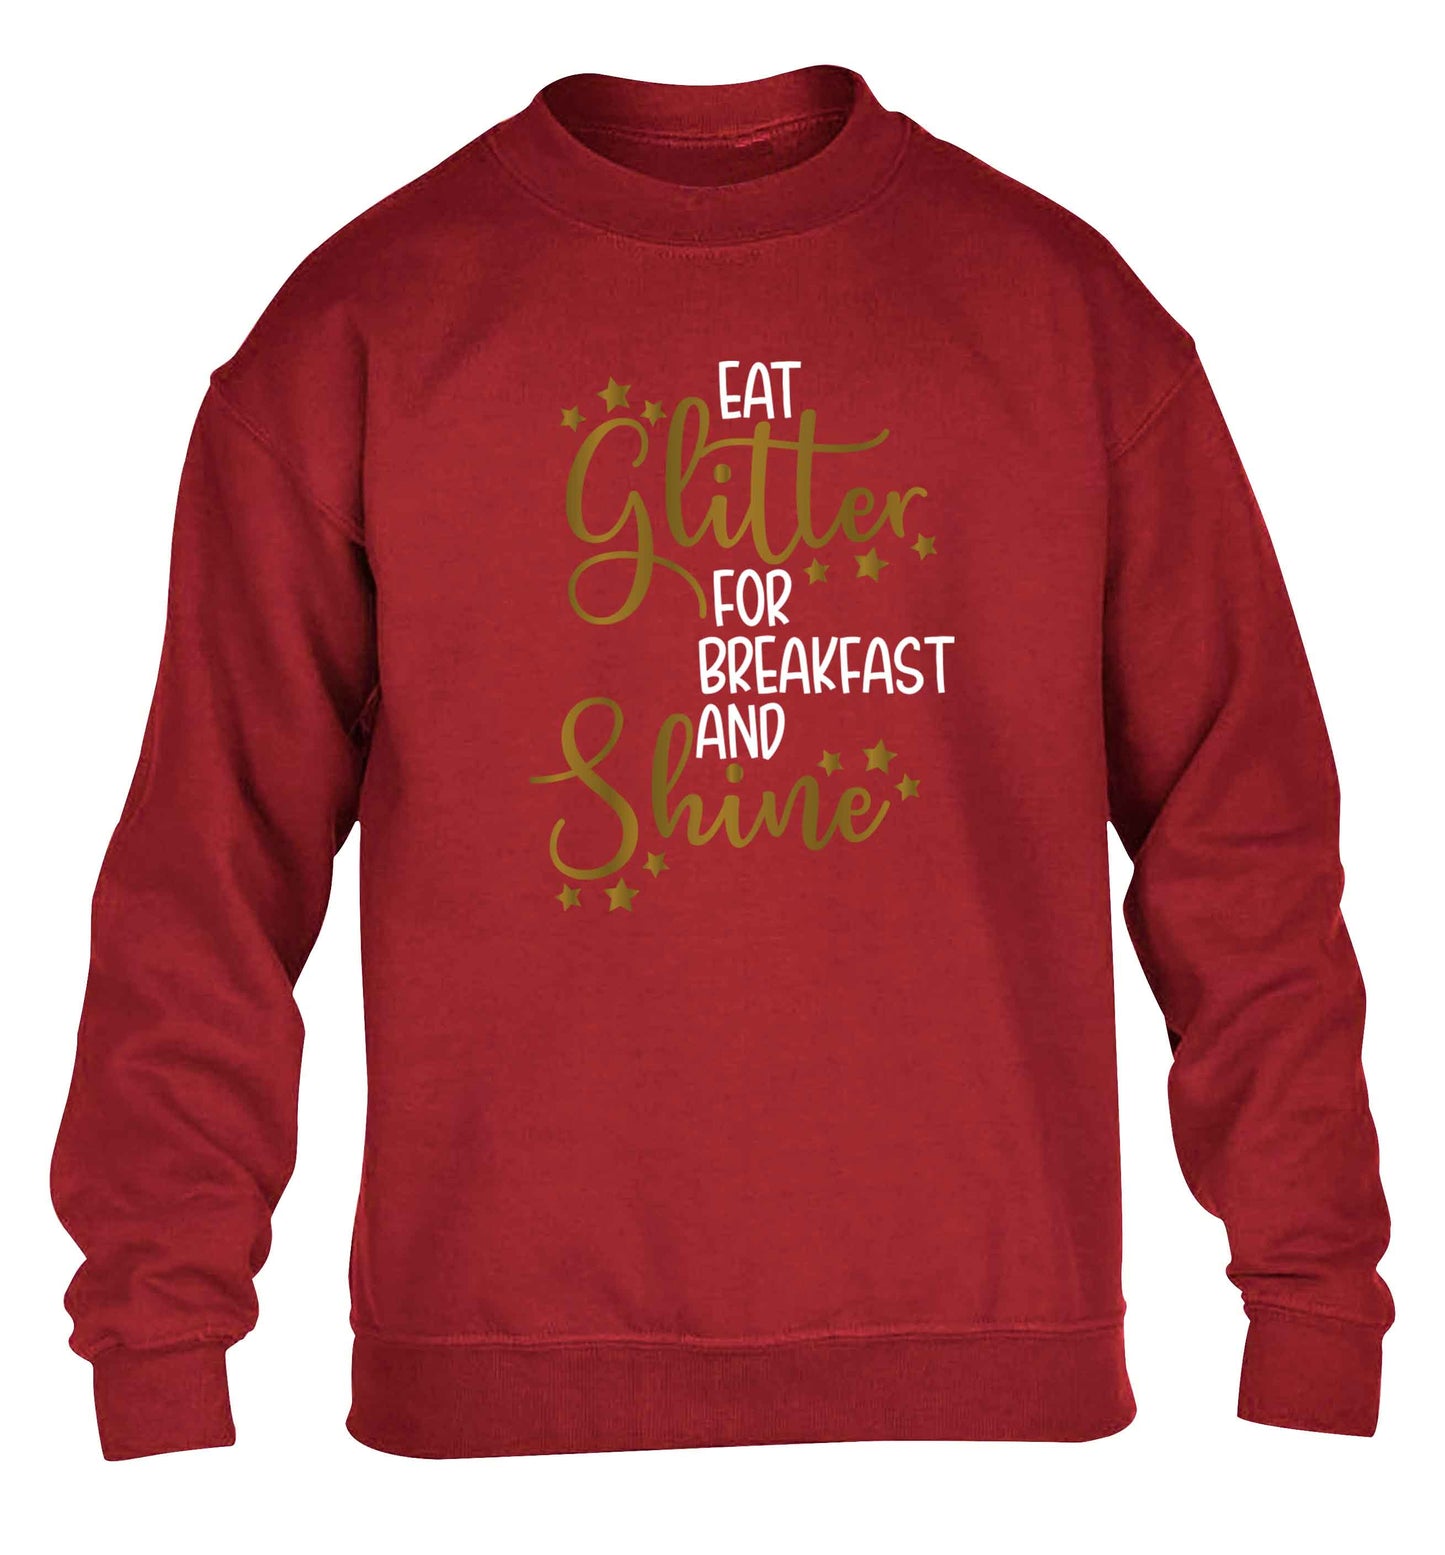 Eat glitter for breakfast and shine all day children's grey sweater 12-13 Years